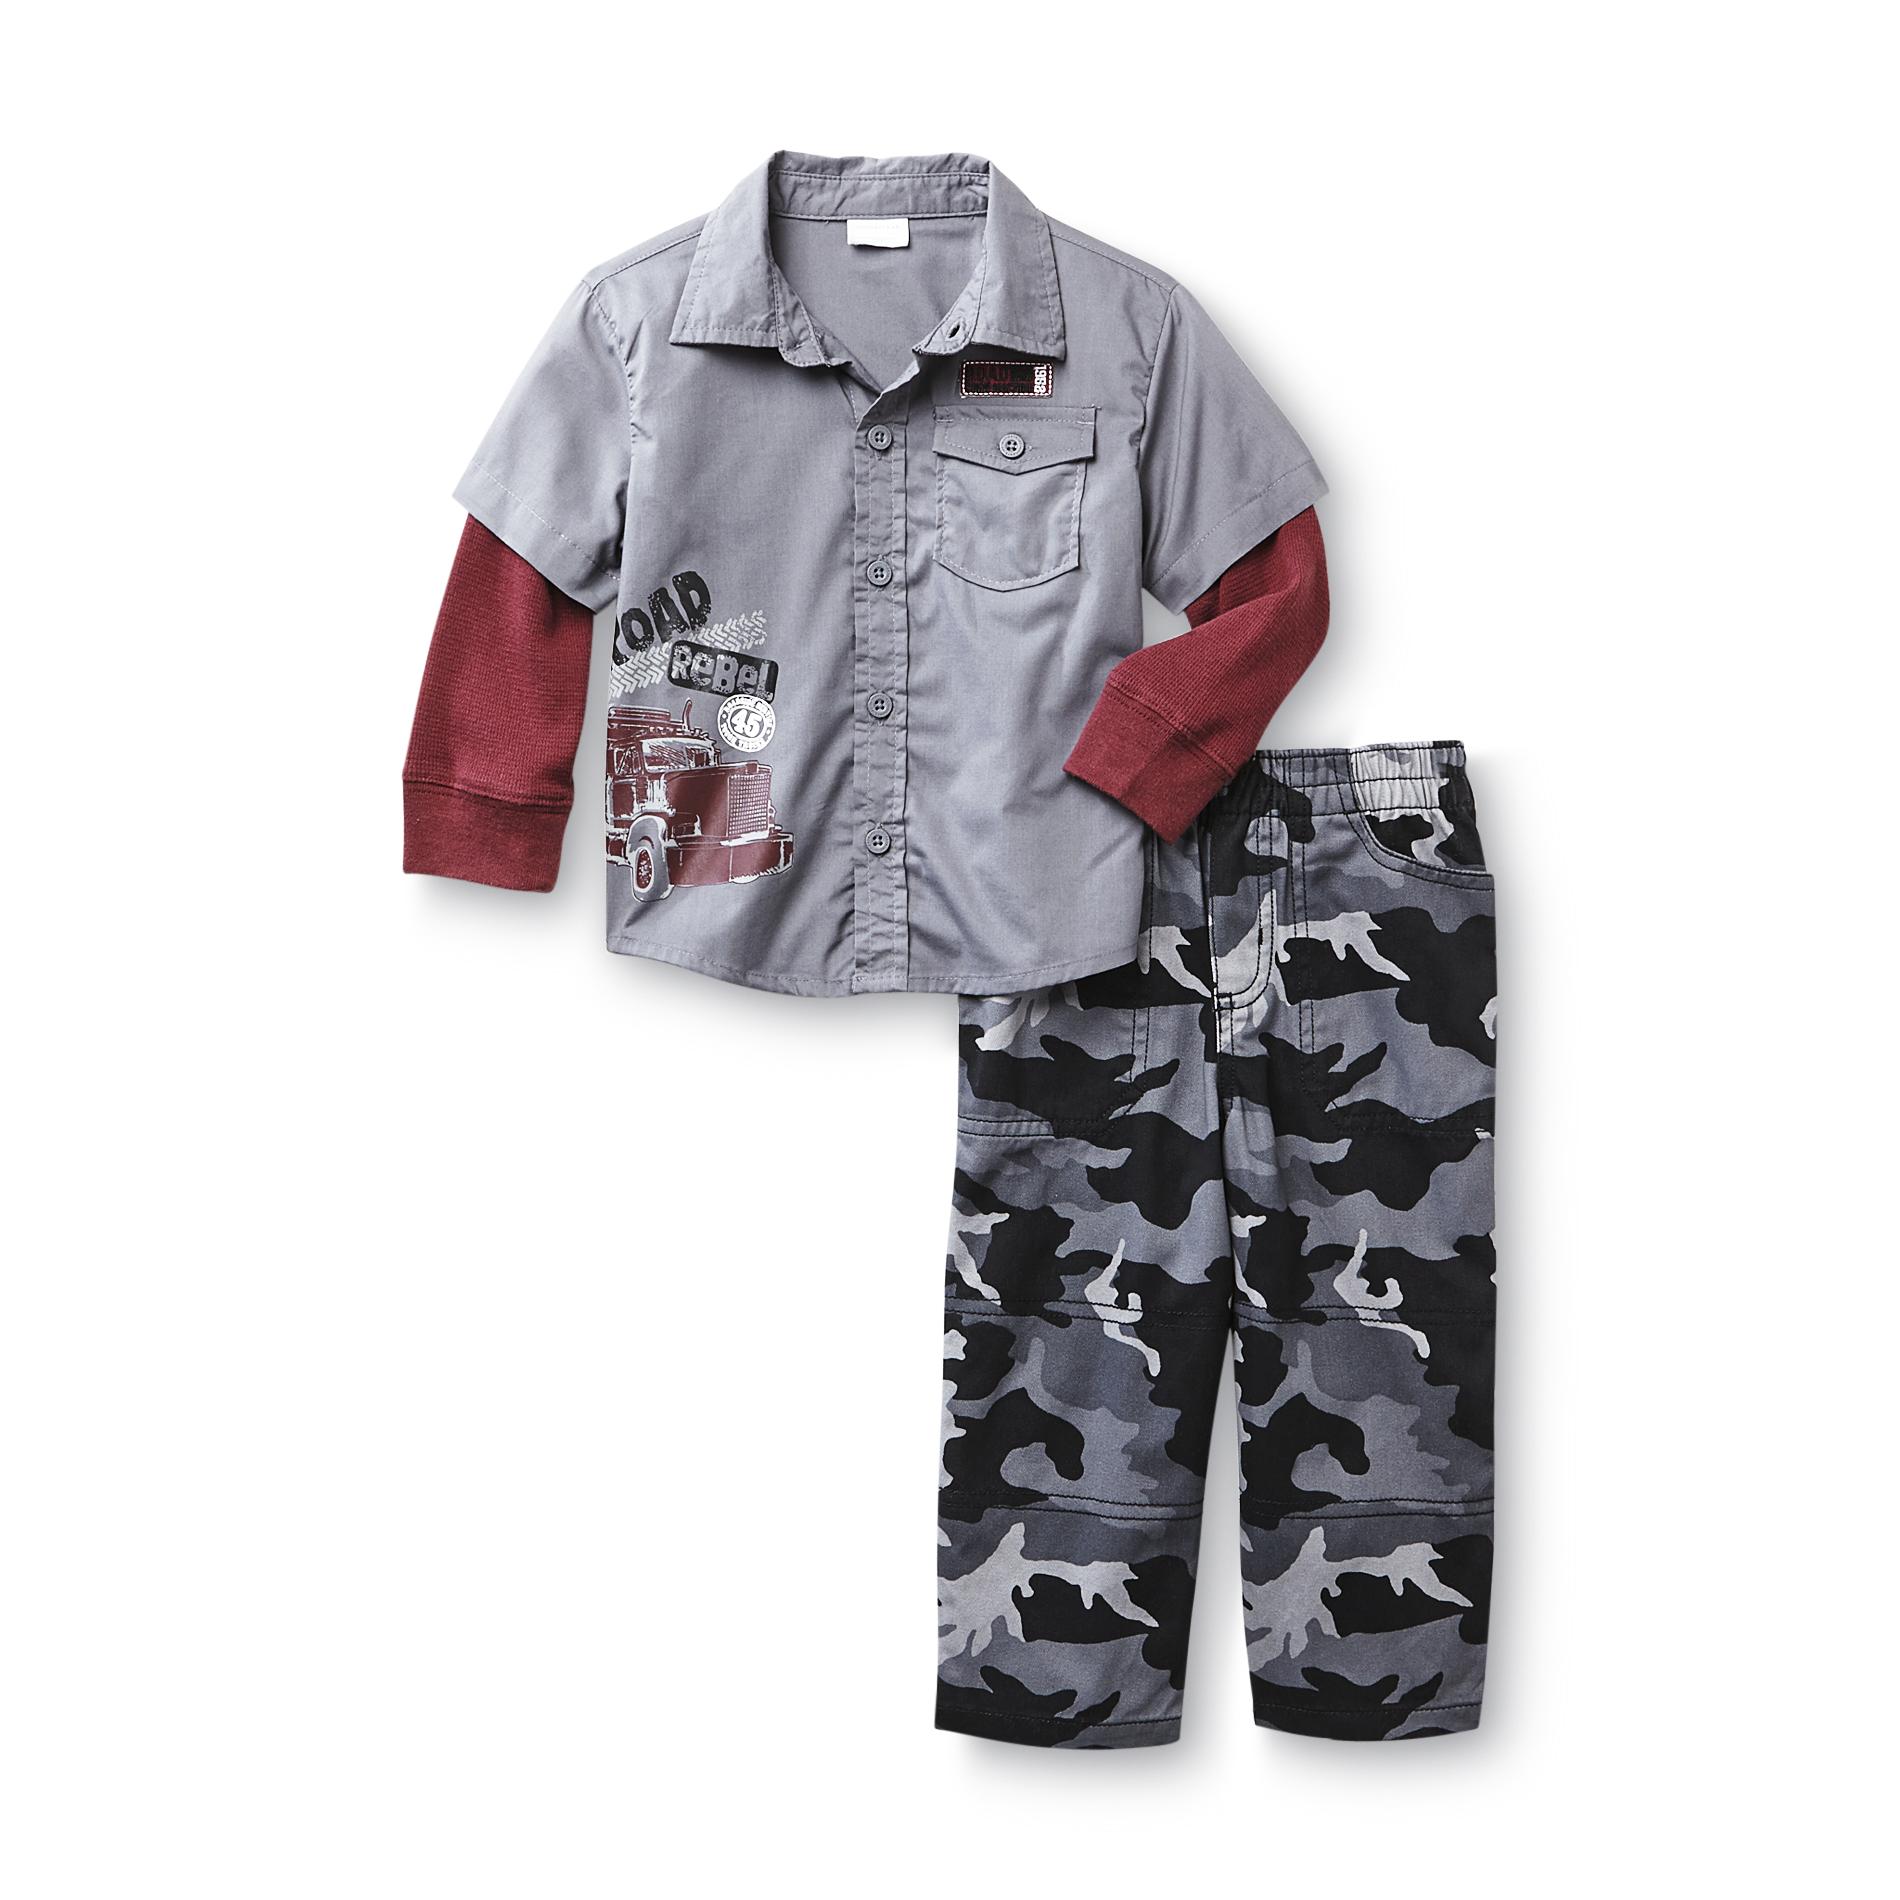 WonderKids Infant & Toddler Boy's Thermal Long-Sleeve Shirt & Twill Pants - Camo & Truck